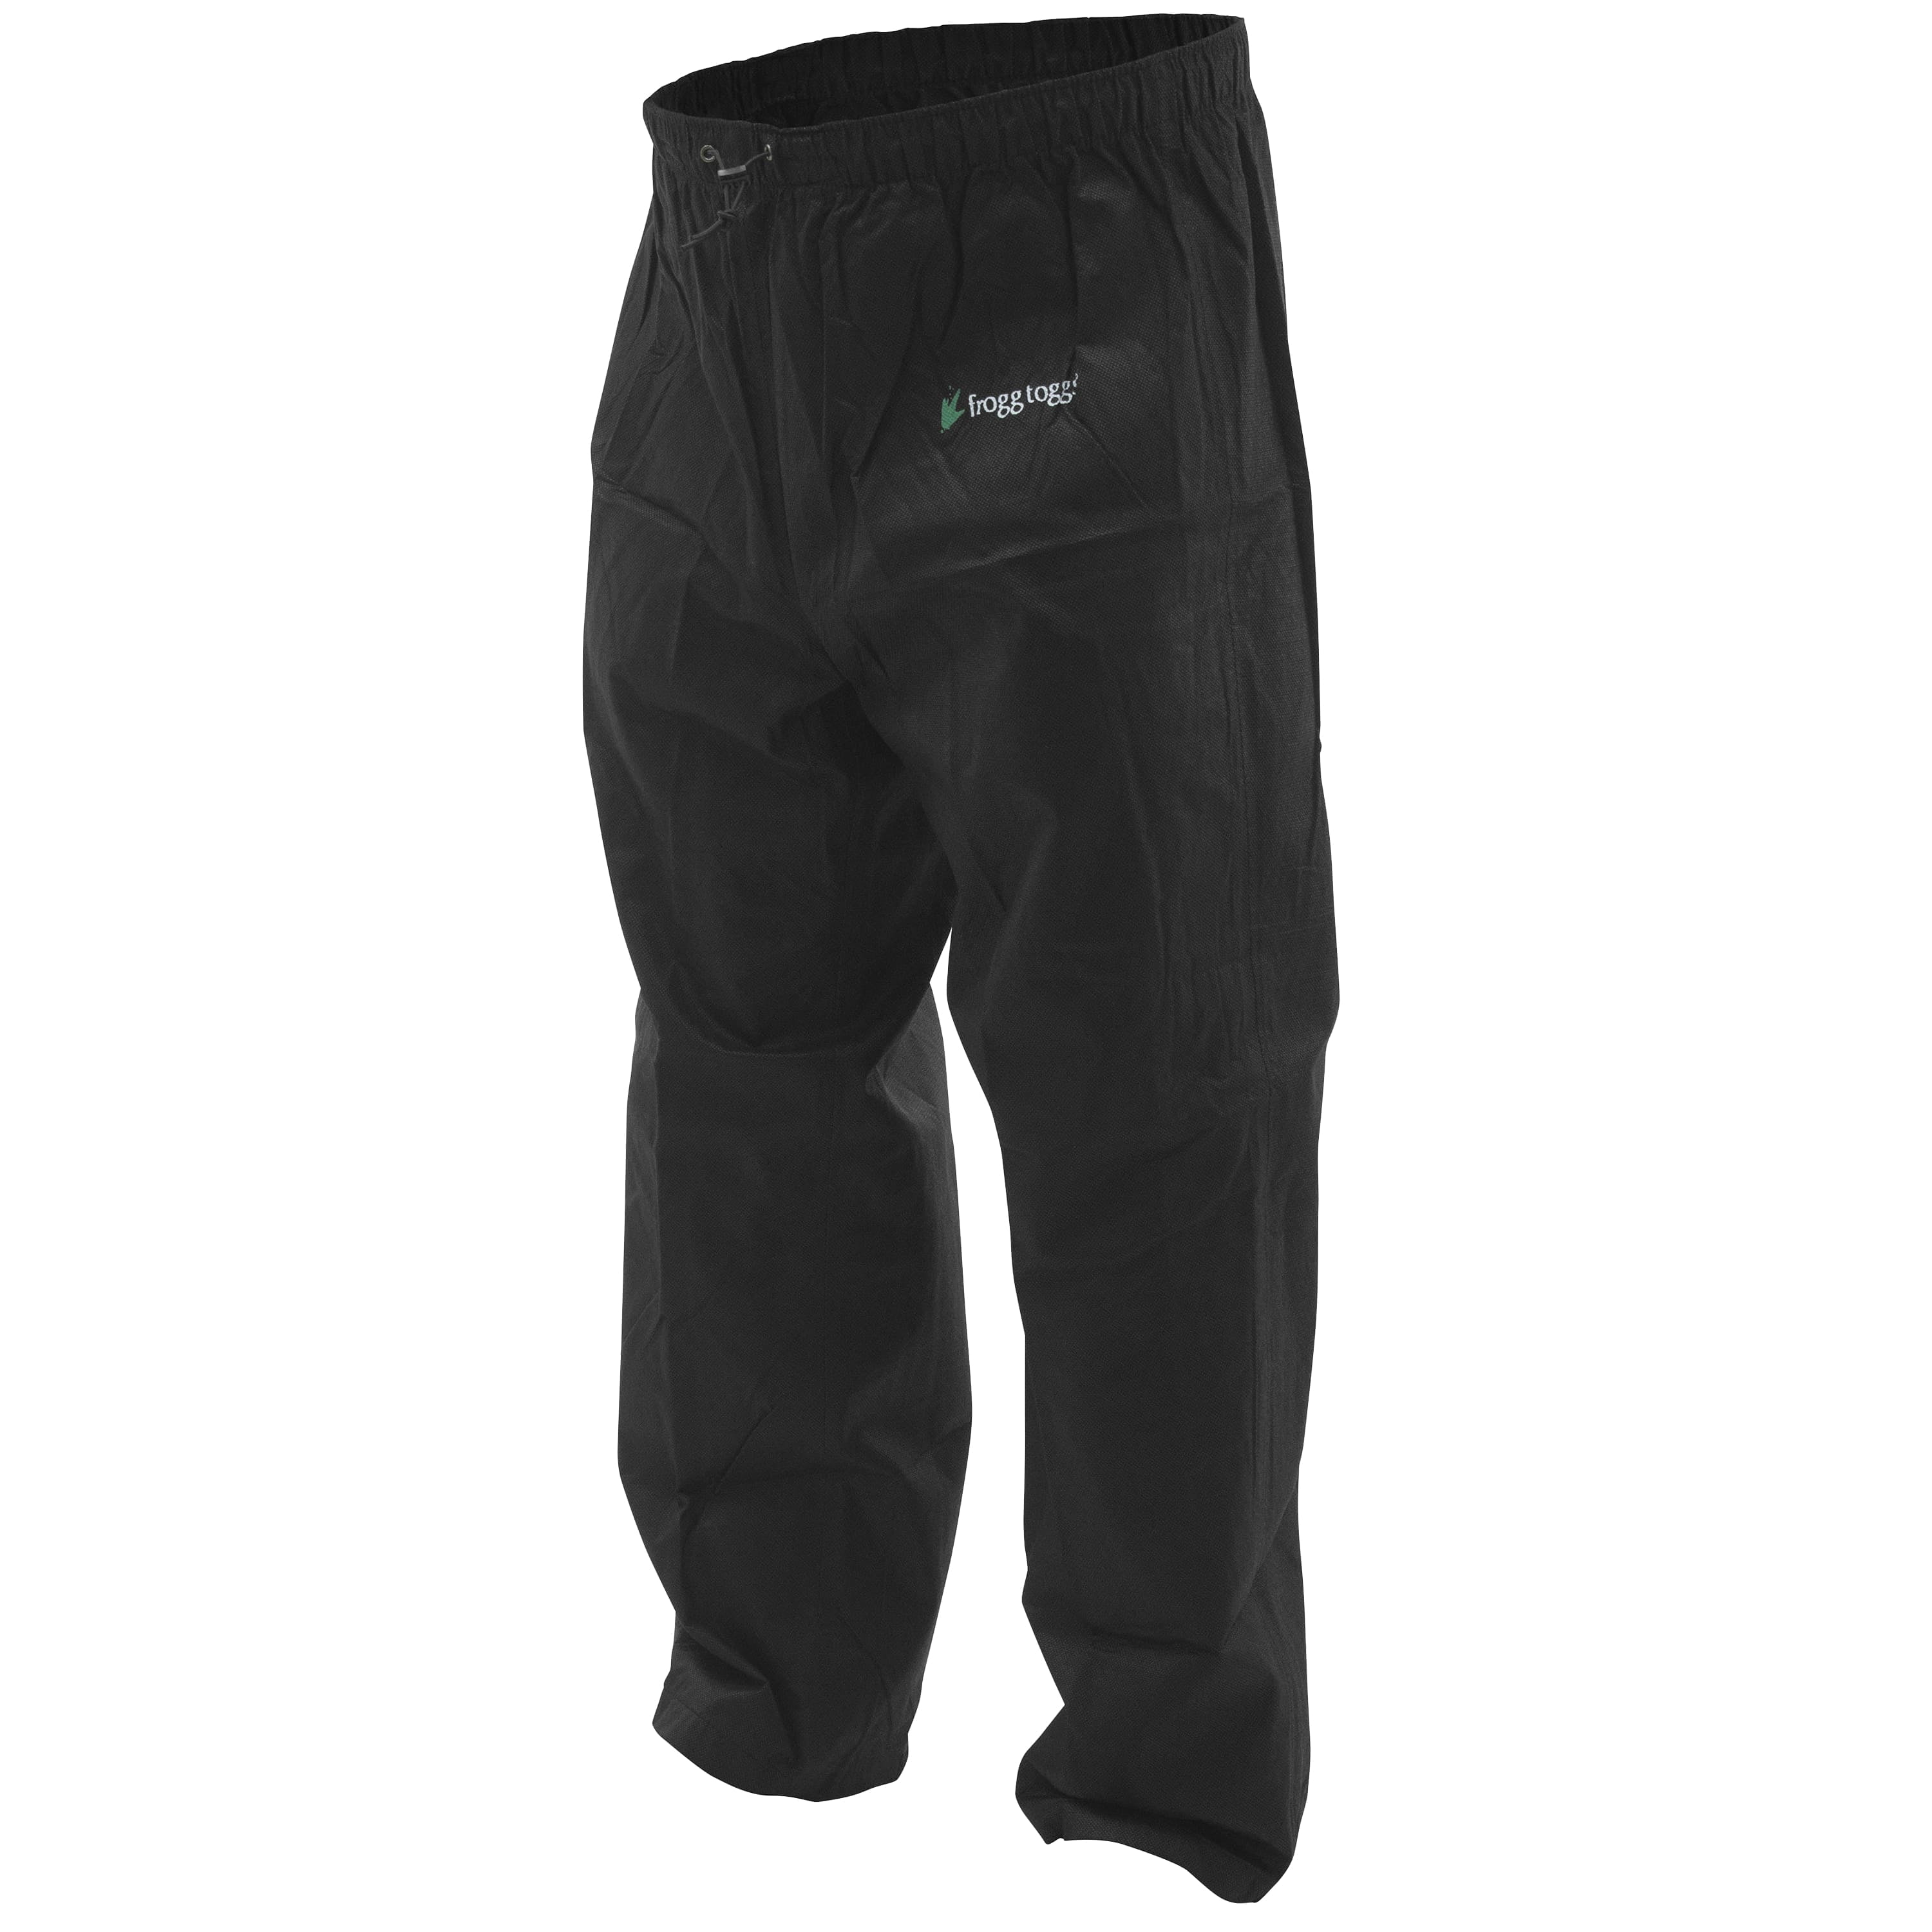 Frogg Toggs Frogg Toggs Men's Classic Pro Action Pant, Black